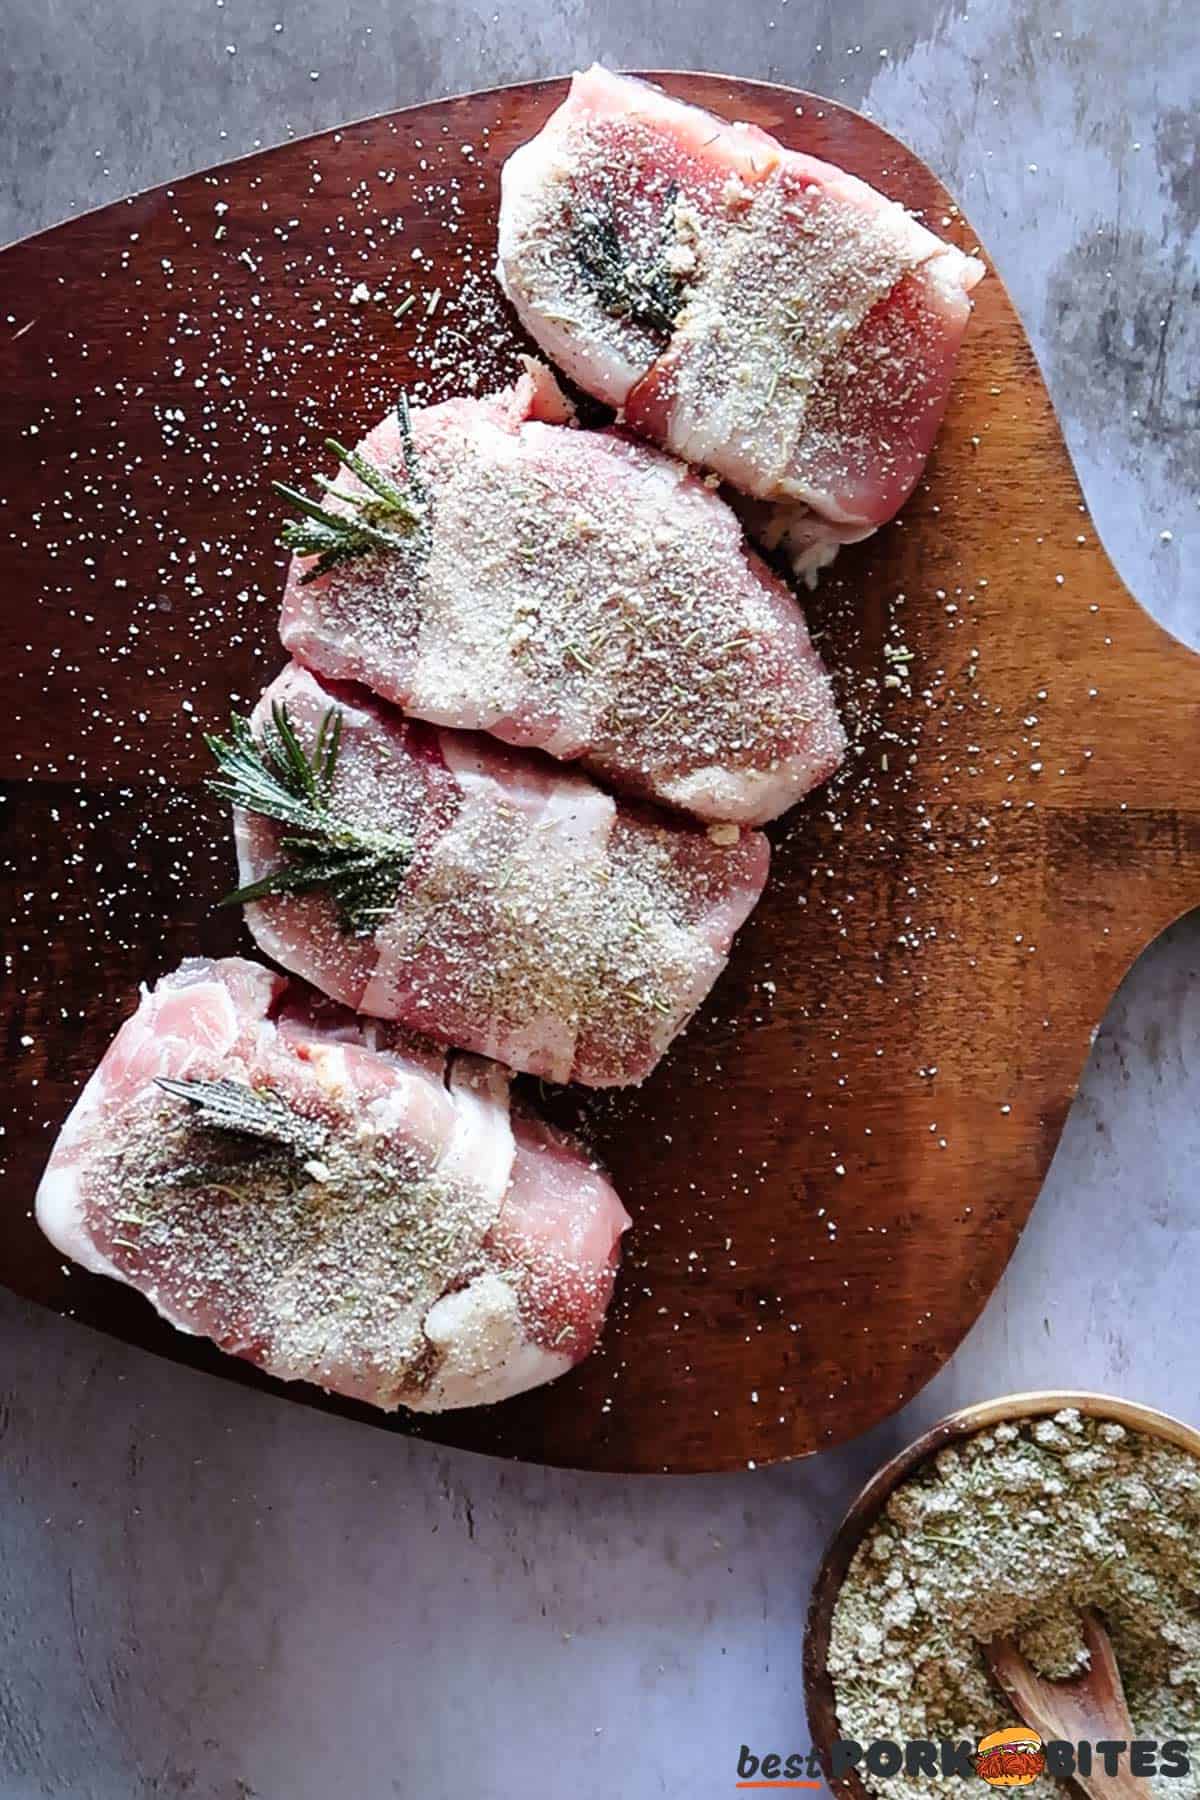 raw pork chops wrapped in bacon with rosemary and covered in rosemary seasoning